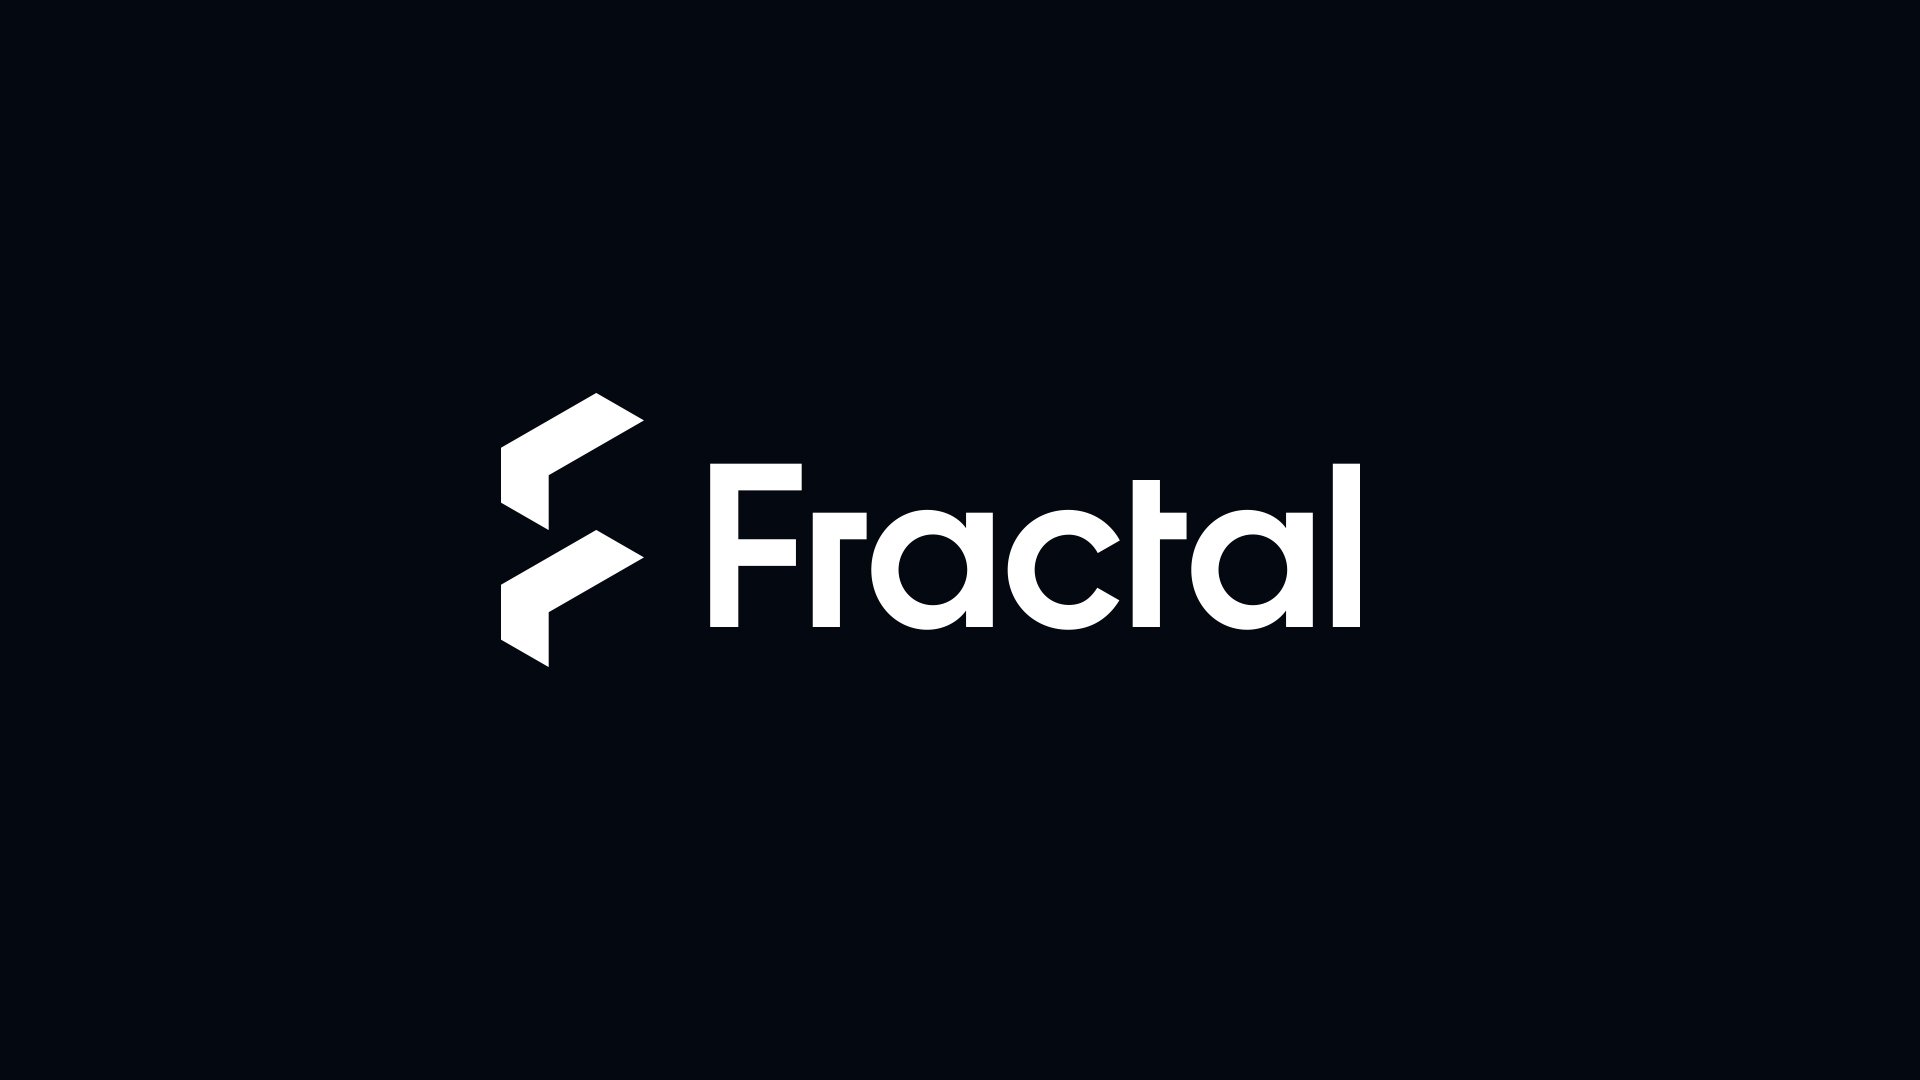 Fractal Design auf Twitter: "New look, same great products. We have  refreshed our logo and appearance to better reflect our passion for  minimalistic Scandinavian design. Visit our new website to learn more.